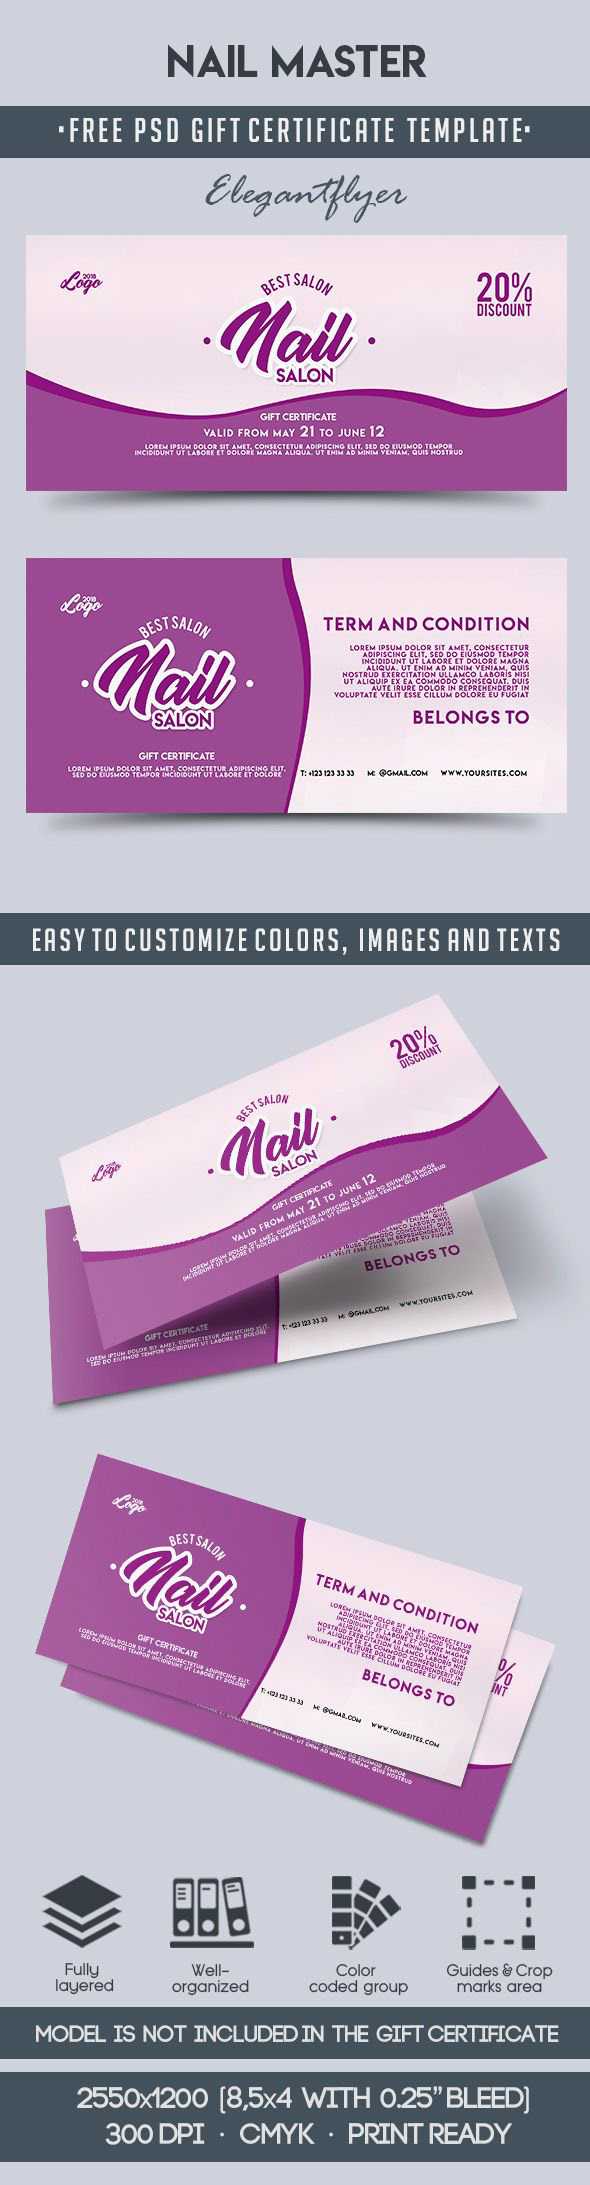 Nail Master – Free Gift Certificate Psd Template On Behance Within Nail Gift Certificate Template Free